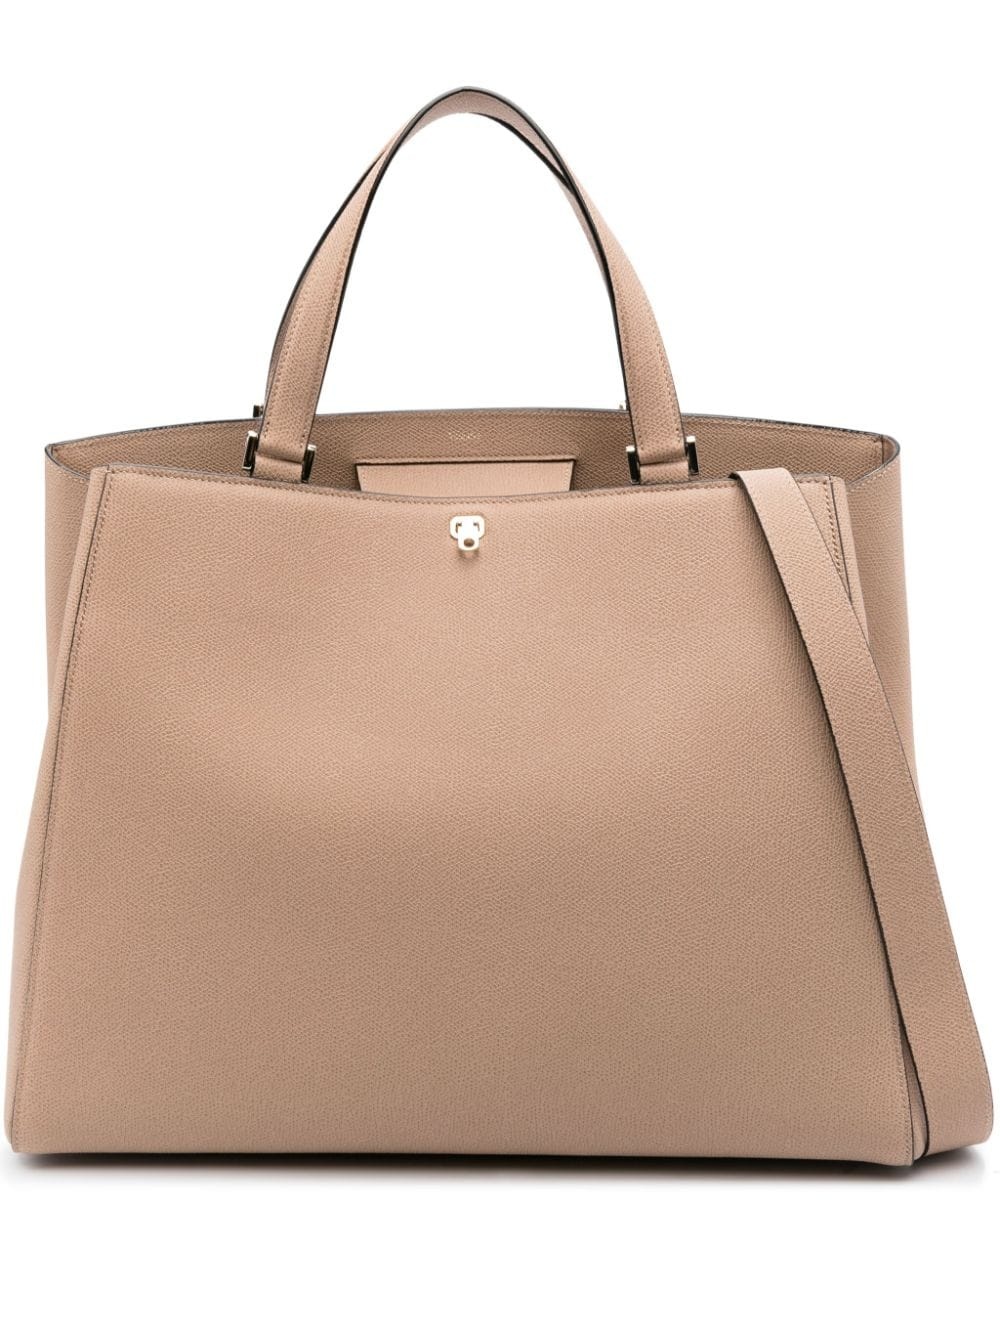 Valextra Brera Large Leather Top-handle Tote Bag In Taupe